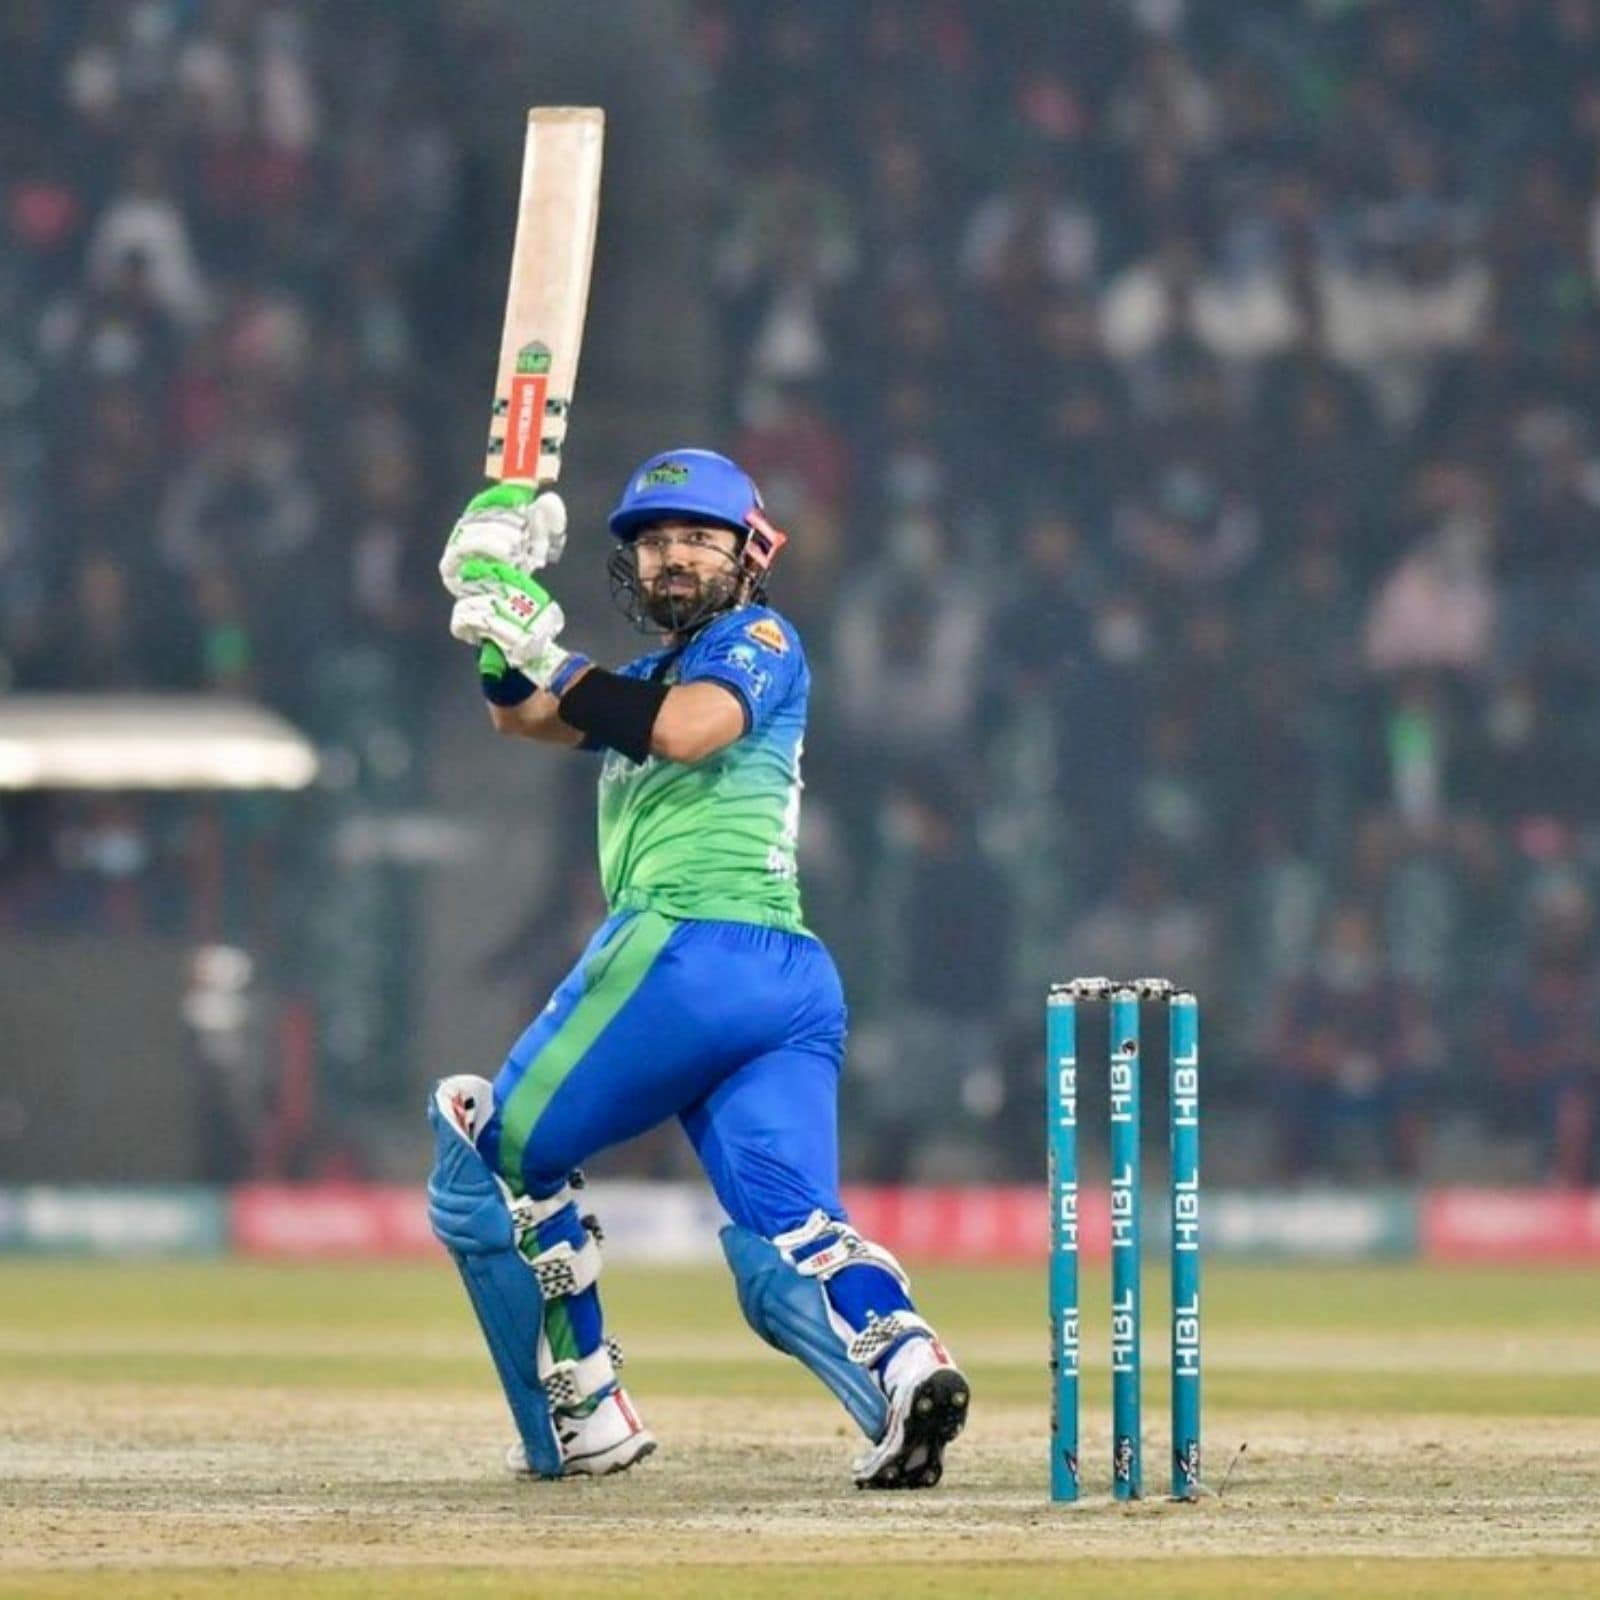 Multan Sultans vs Lahore Qalandars Live Streaming When and Where to Watch Pakistan Super League 2022 Final Live Coverage on Live TV Online